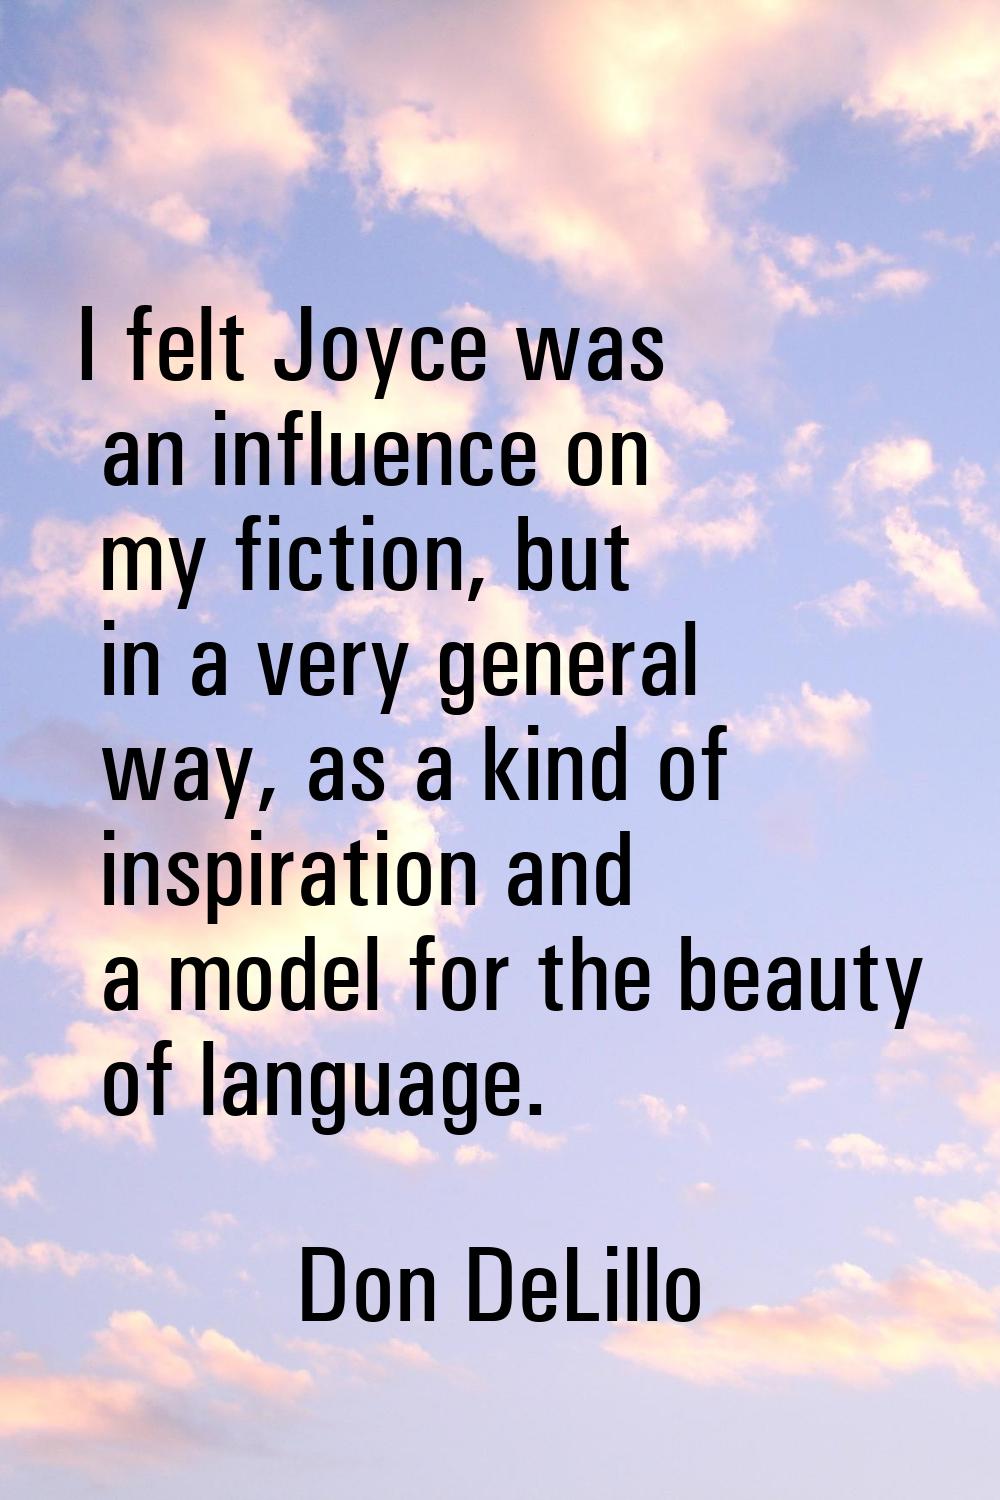 I felt Joyce was an influence on my fiction, but in a very general way, as a kind of inspiration an